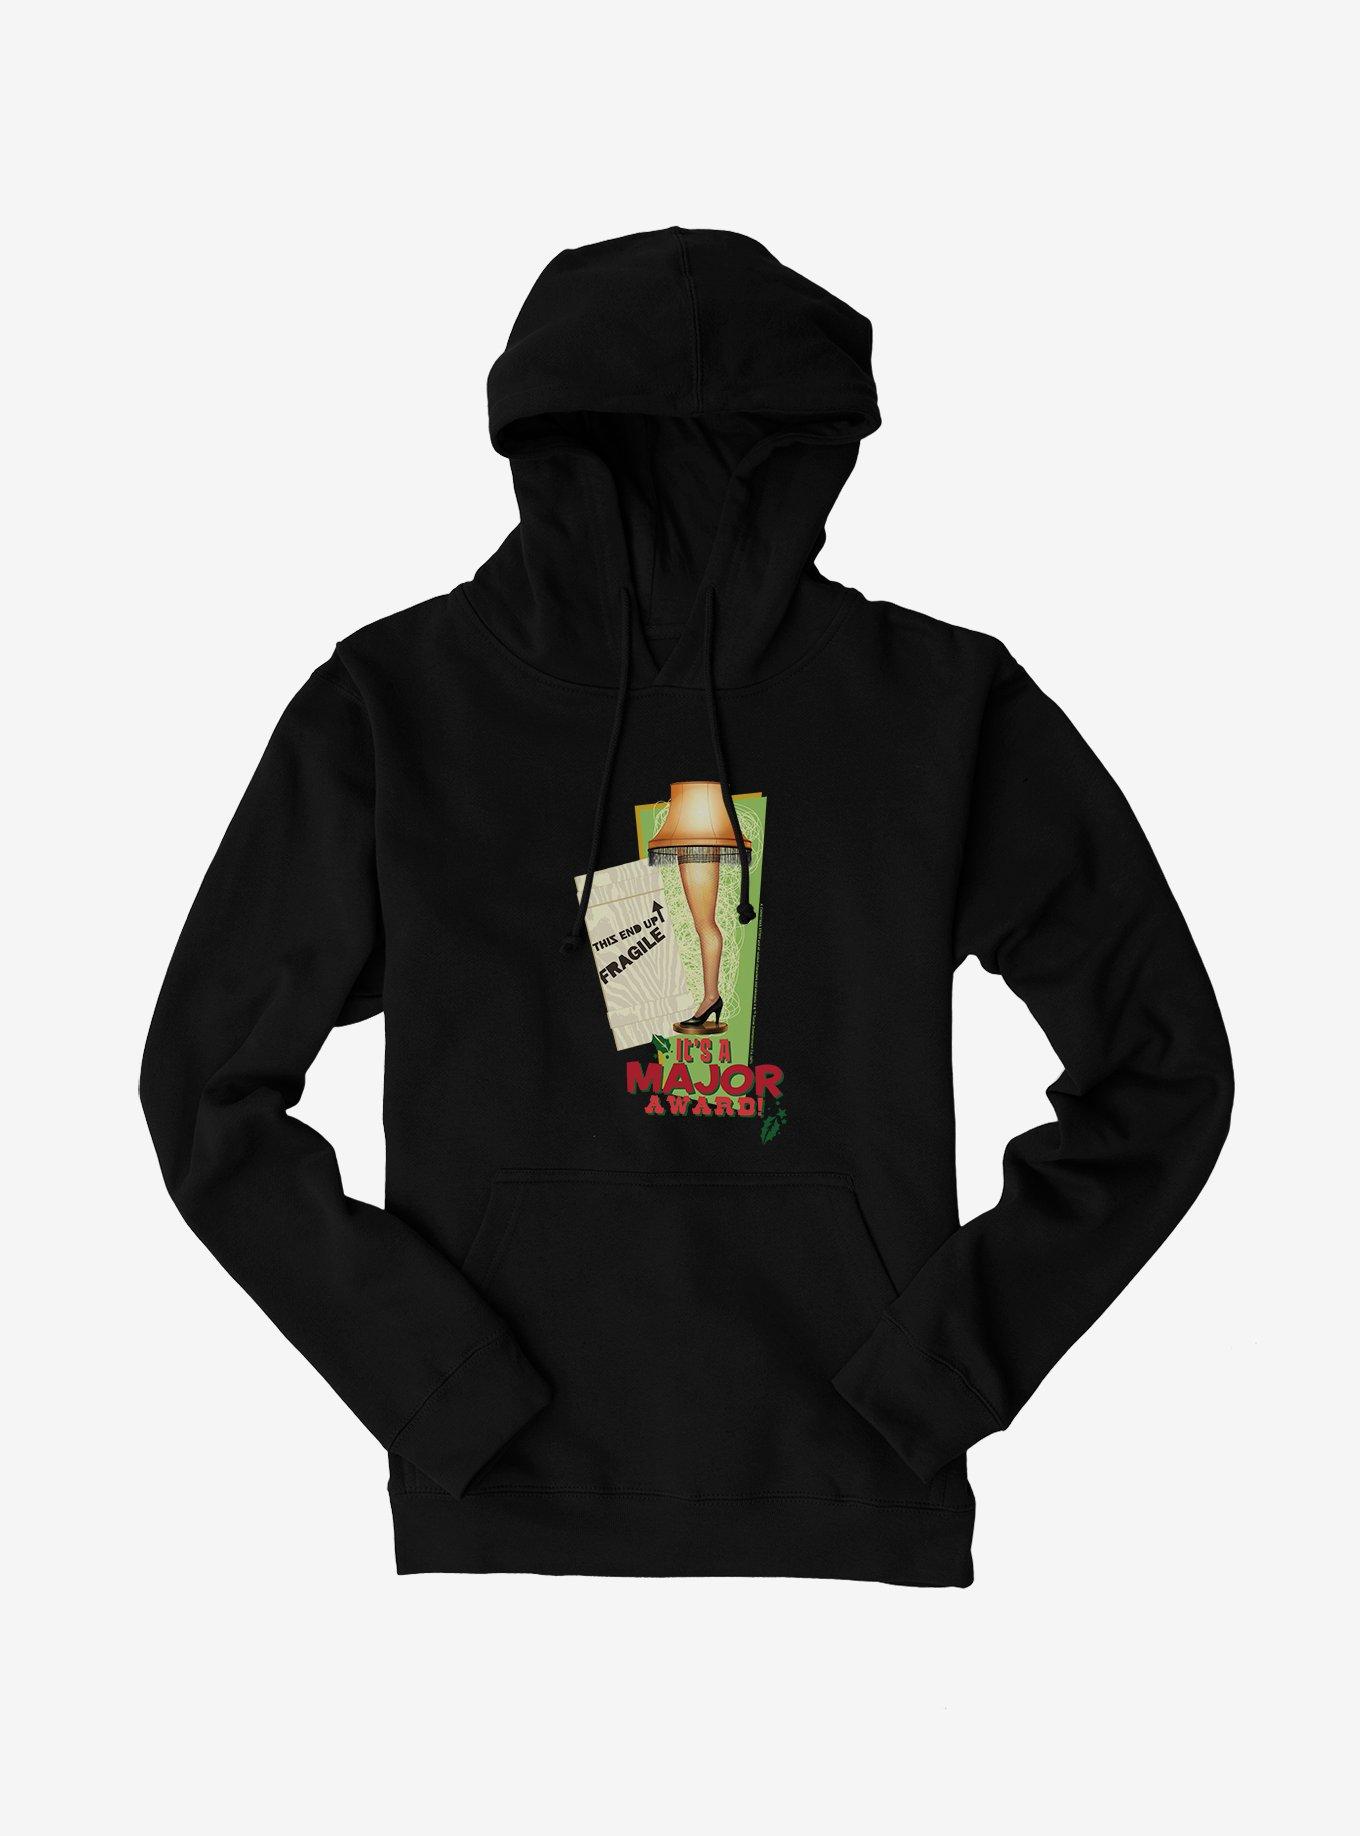 A Christmas Story This End Up Fragile Leg Lamp Hoodie